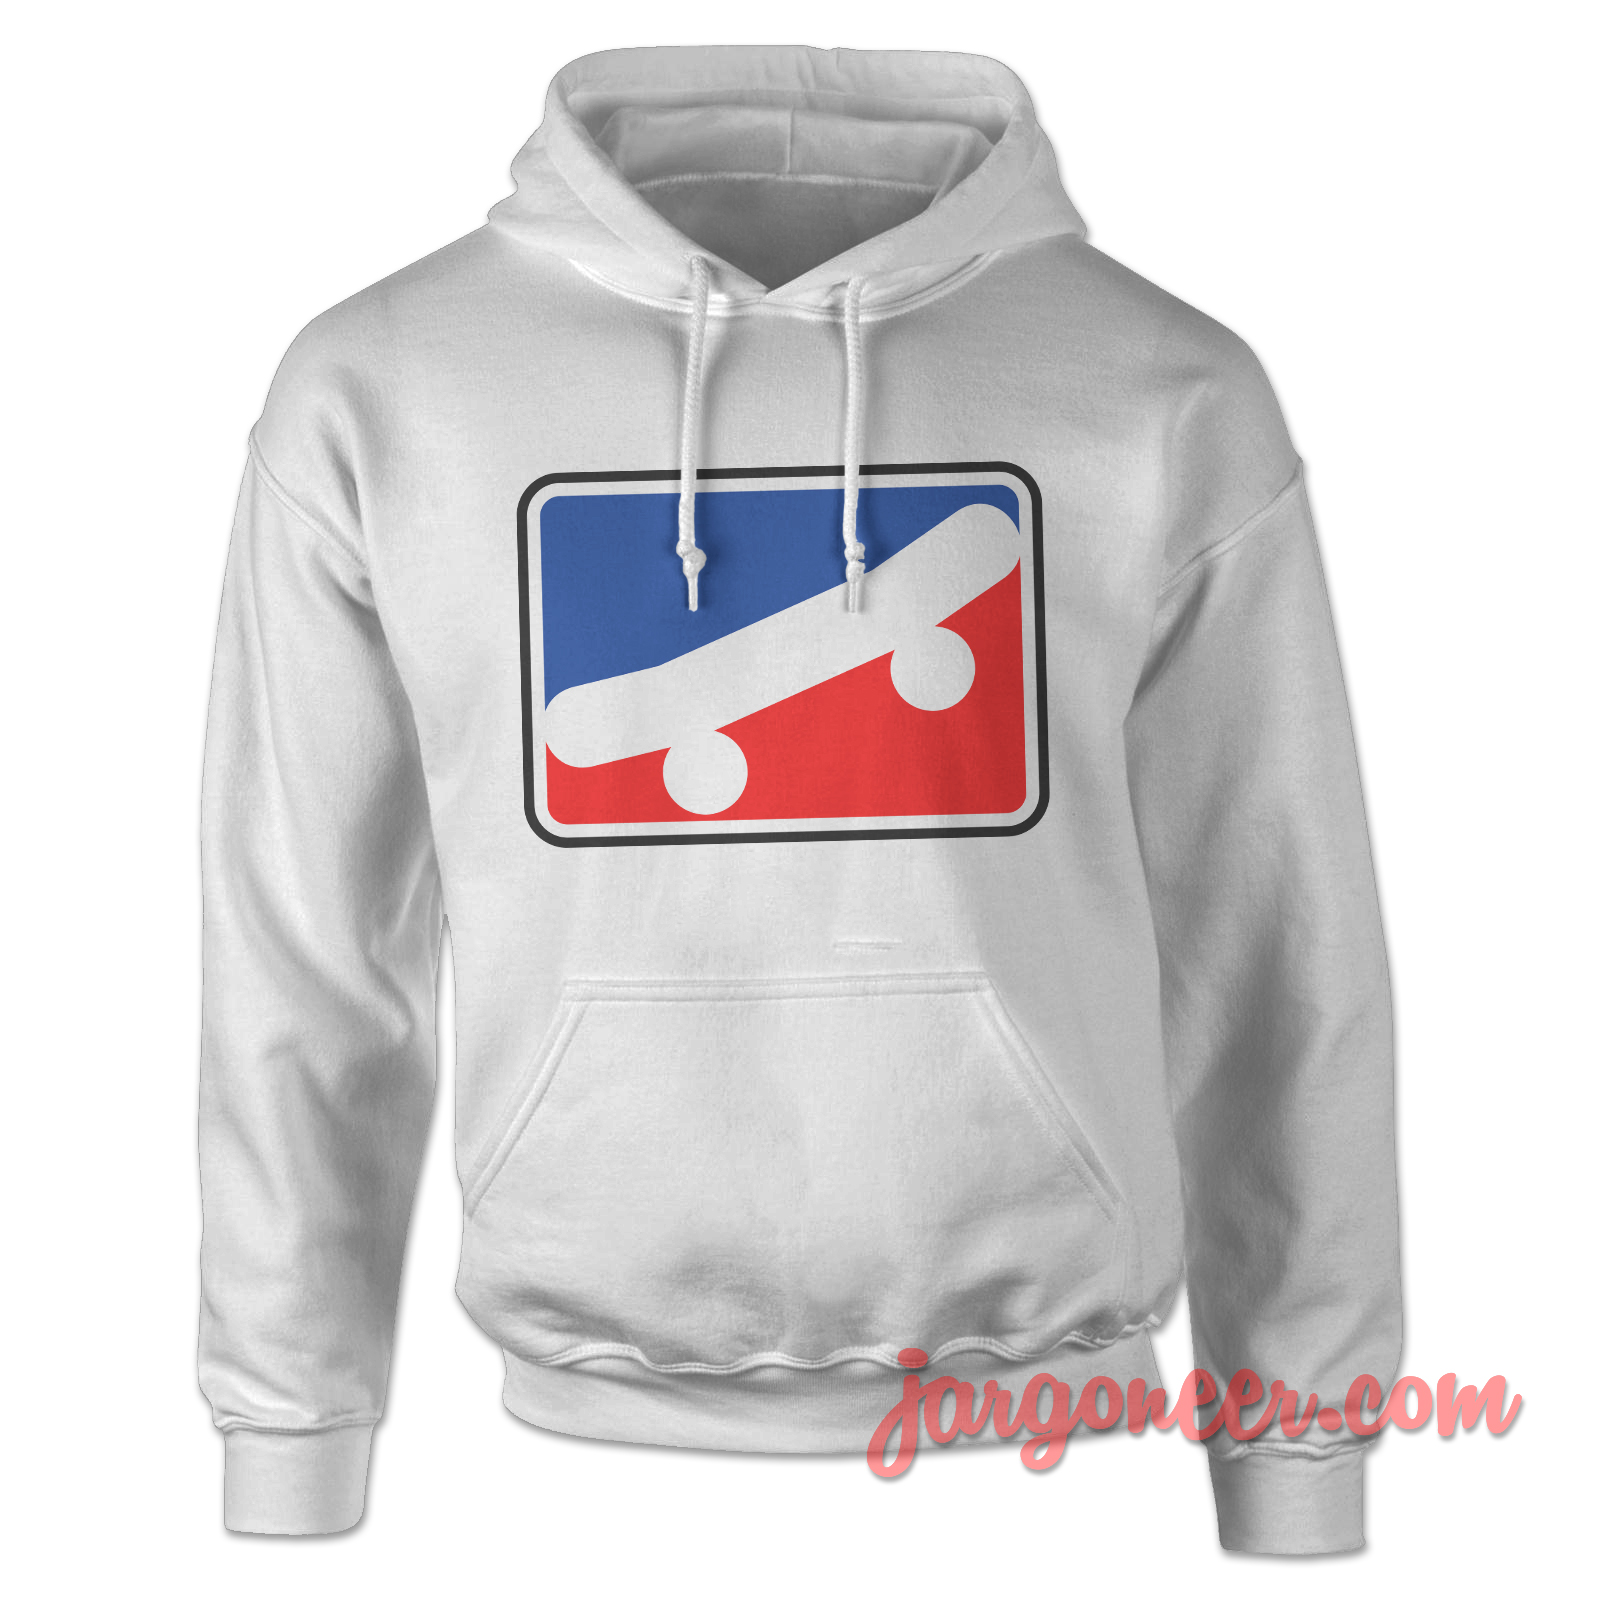 Skate Nation White Hoody - Shop Unique Graphic Cool Shirt Designs